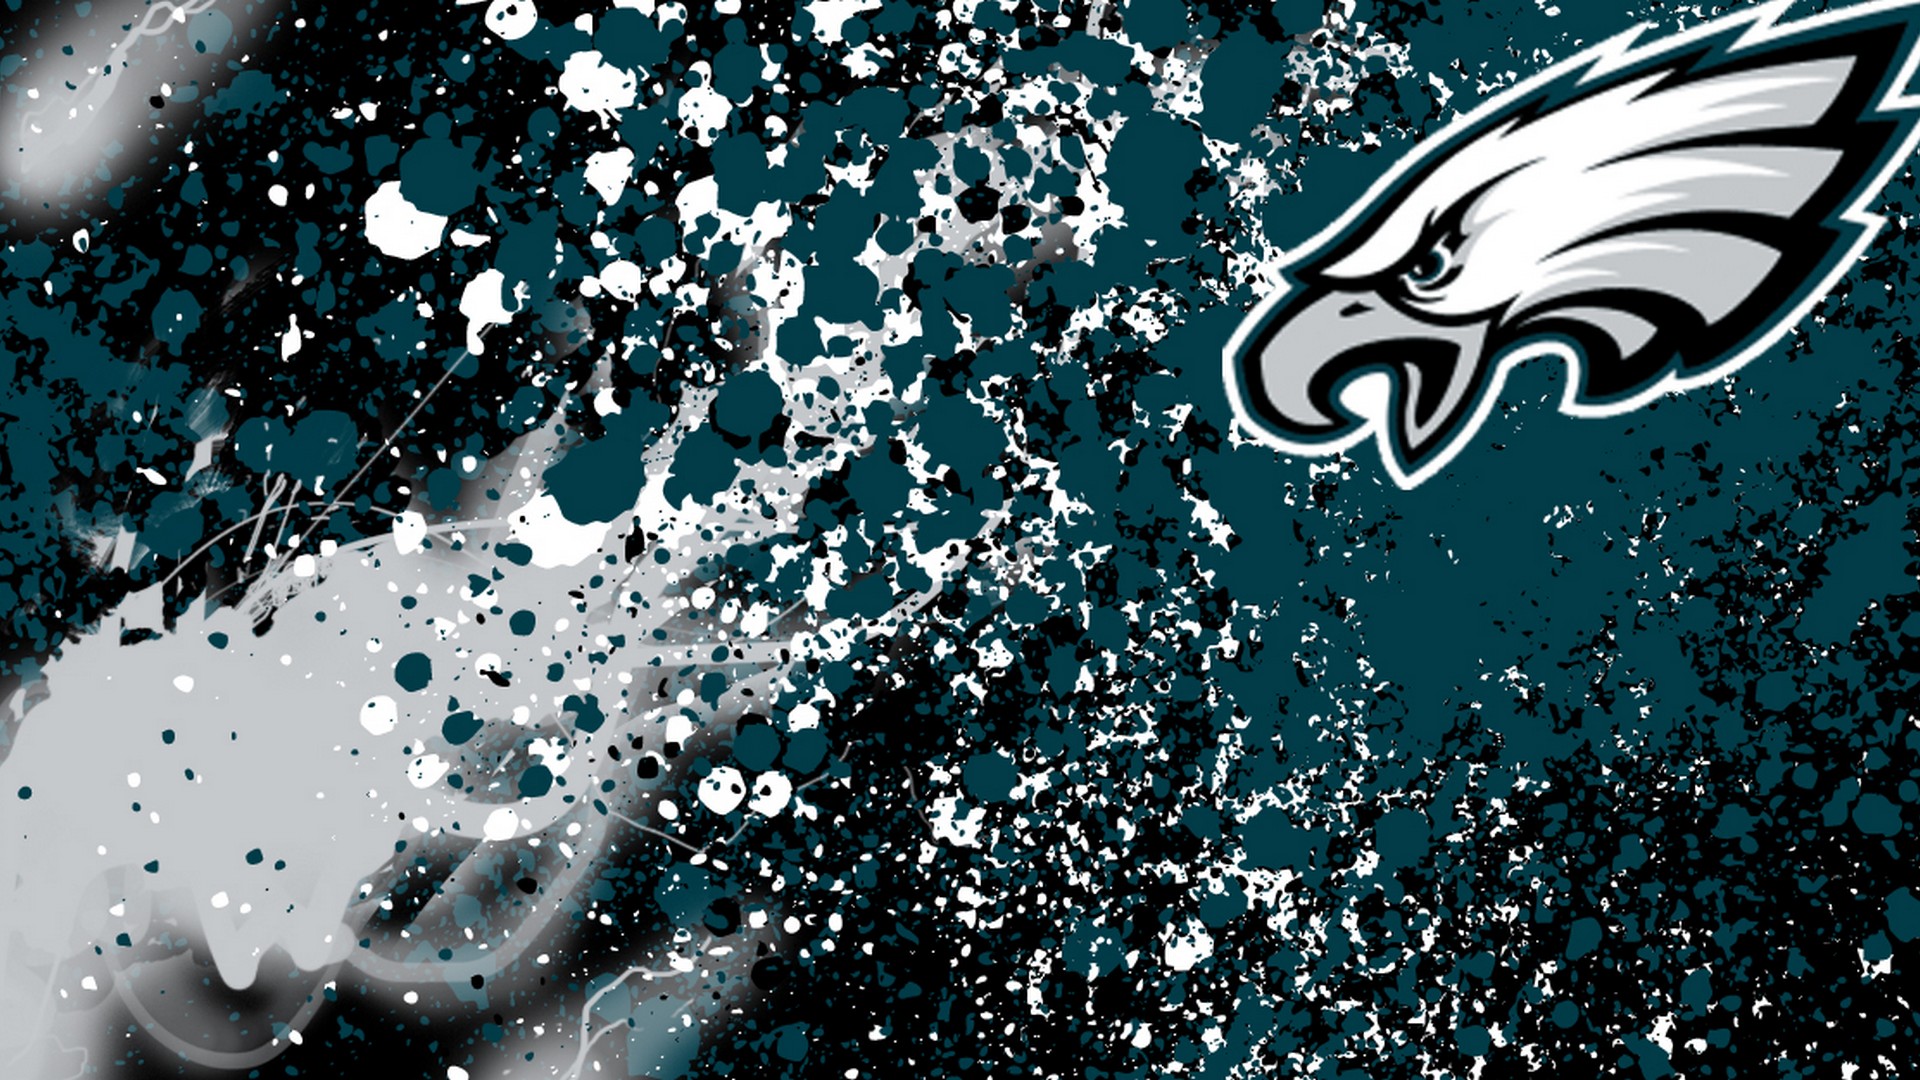 Phila Eagles Backgrounds HD With Resolution 1920X1080 pixel. You can make this wallpaper for your Mac or Windows Desktop Background, iPhone, Android or Tablet and another Smartphone device for free